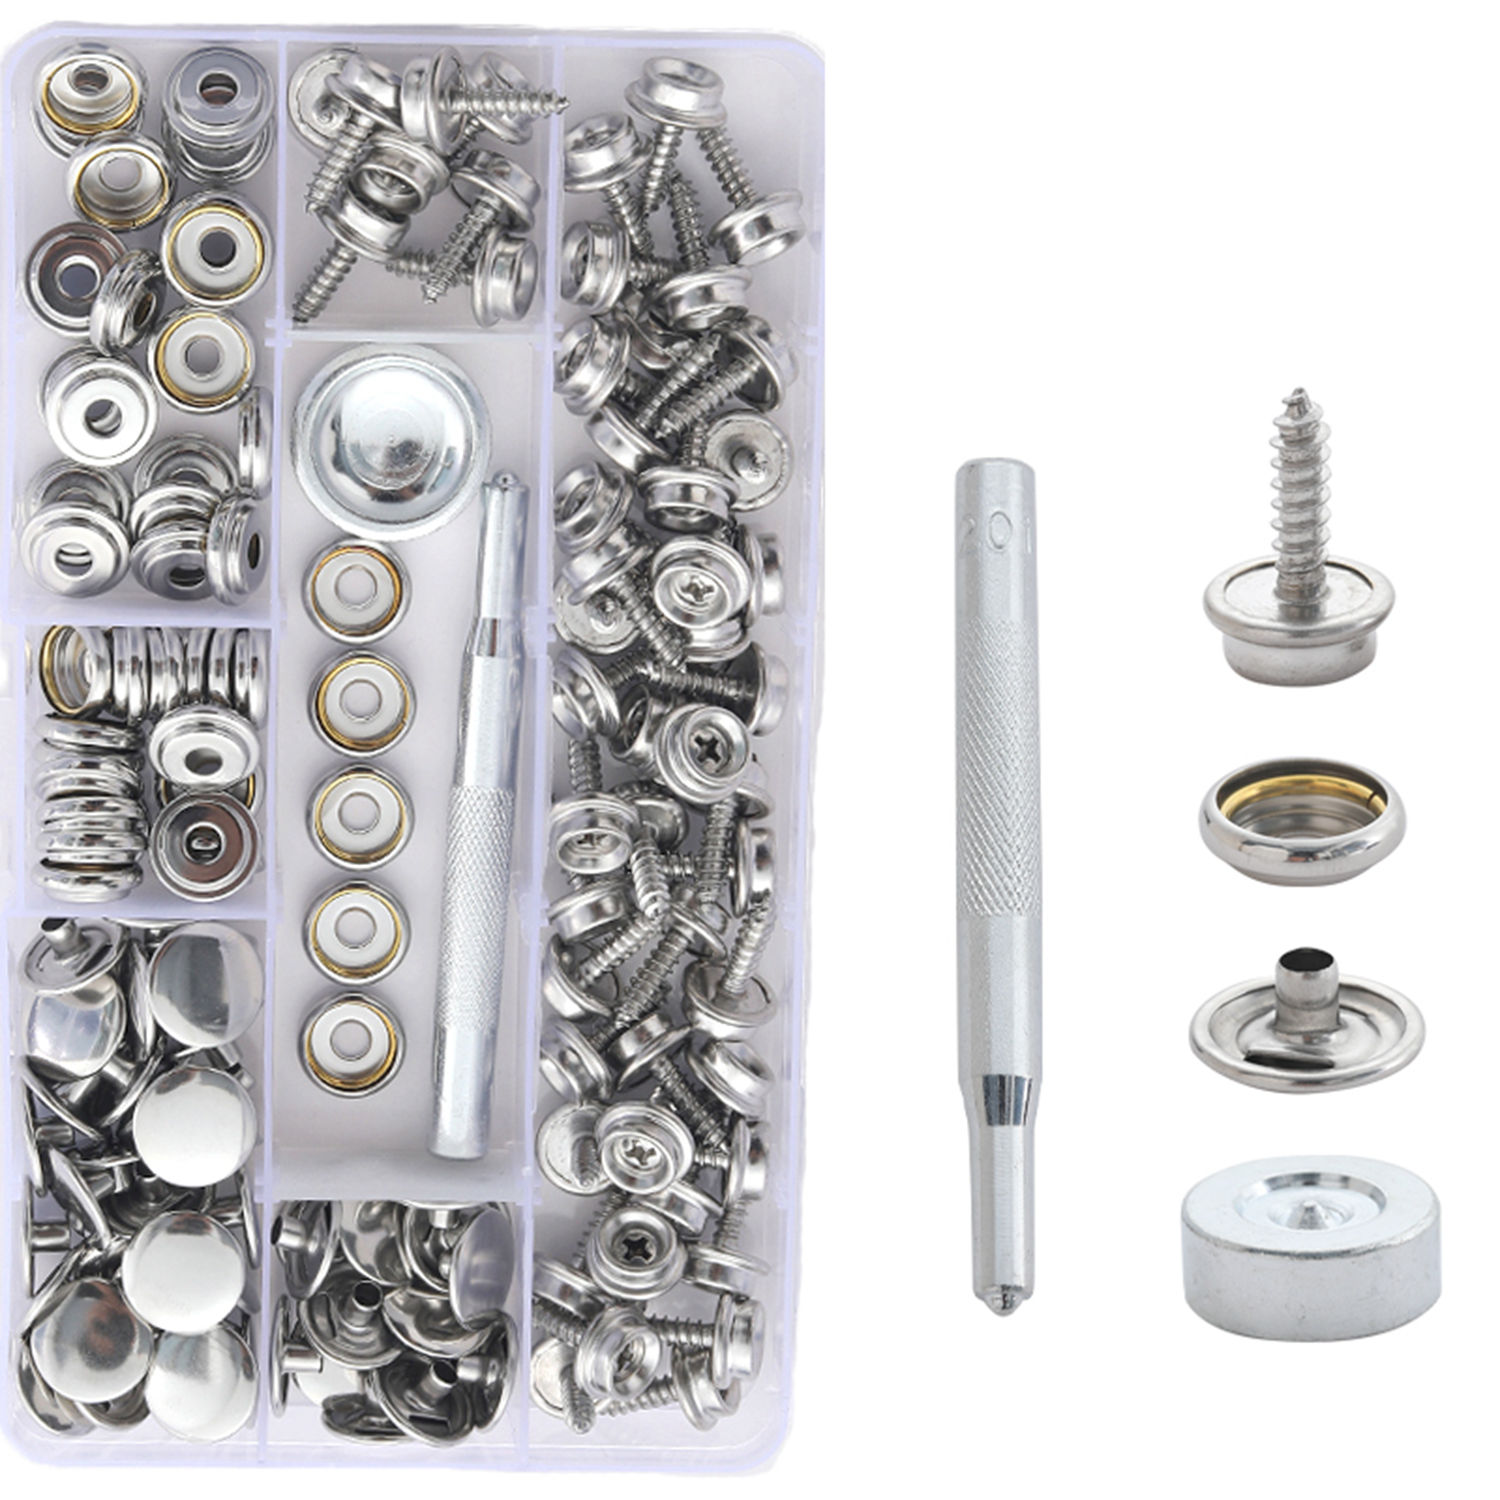 150pcs Fastener Screw Snaps Kit - Stainless Steel Snap Button Canvas Marine  G